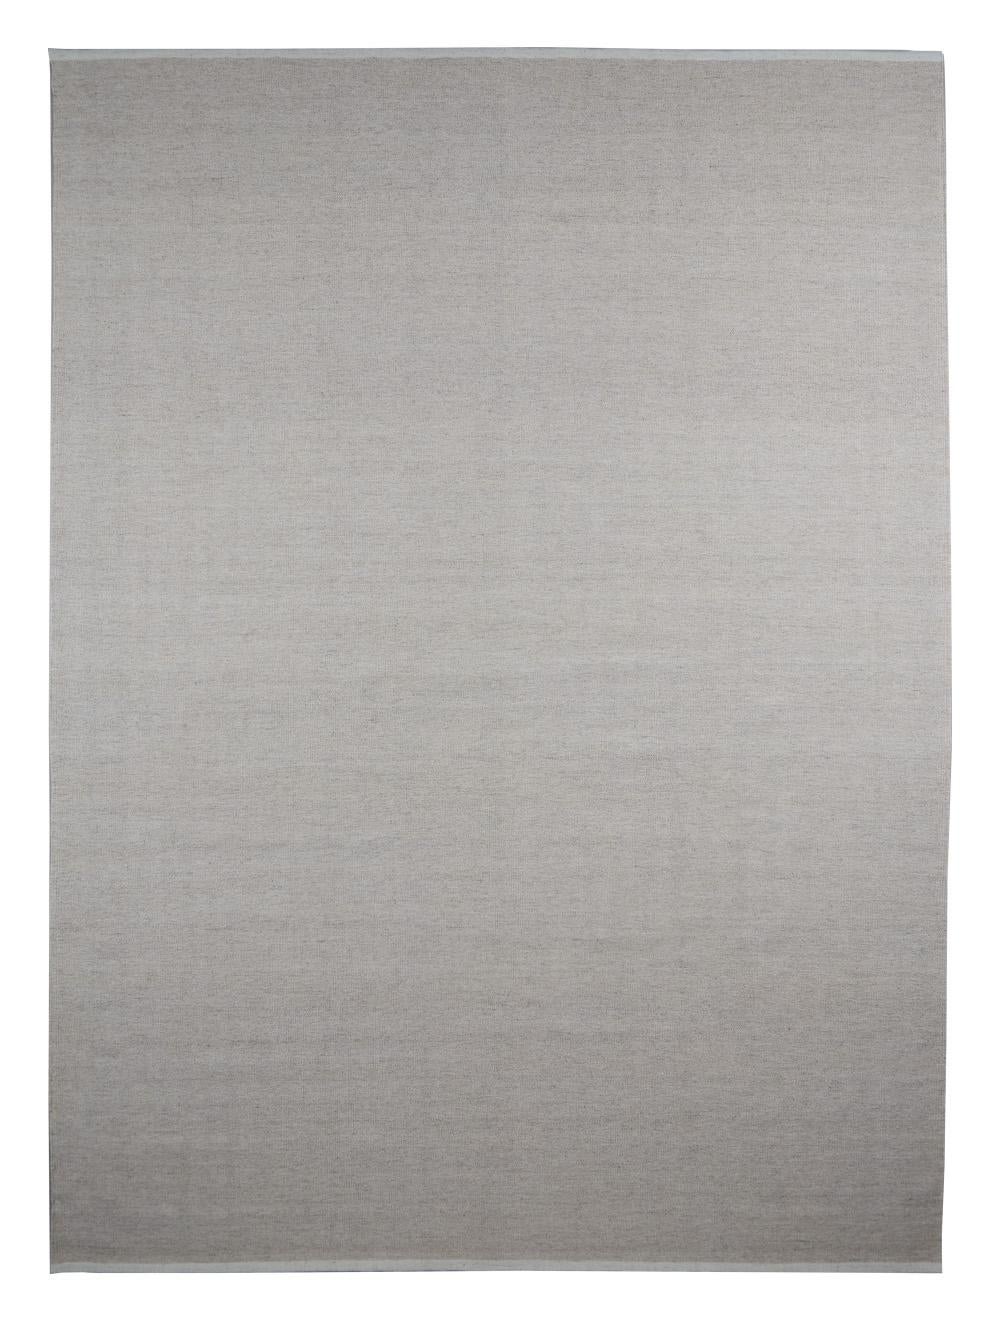 Chalk Escape Kelim Carpet by Massimo Copenhagen.
Designed by Space Copenhagen.
Handwoven.
Materials: 100% undyed natural wool.
Dimensions: W 300 x H 400 cm
Available colors: Chalk, Chalk with Fringes, Light Beige, Light Beige with Stitches,